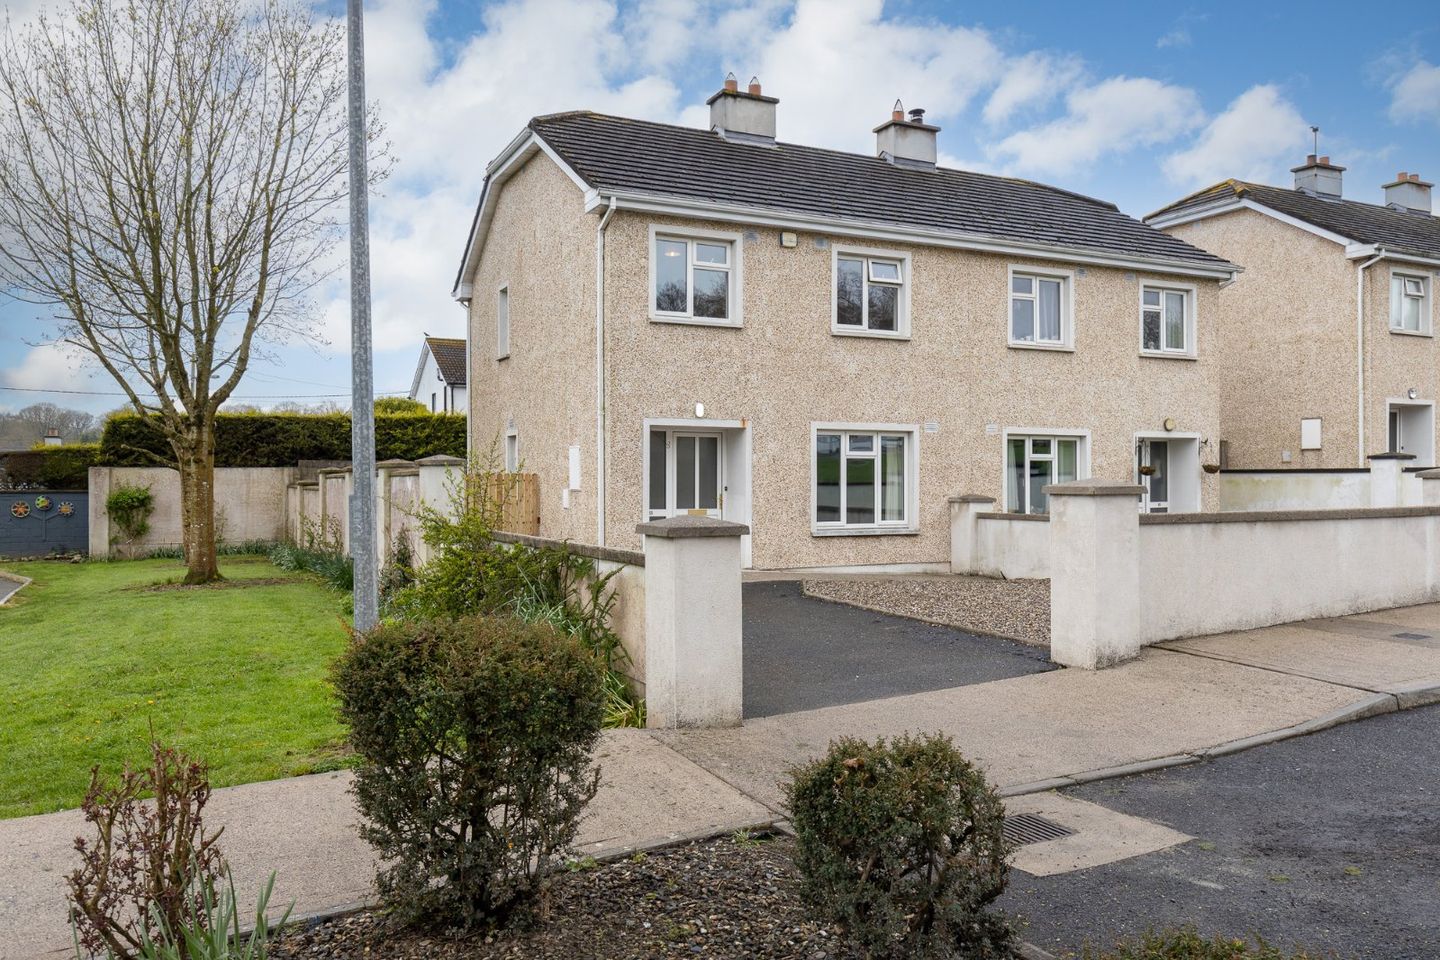 11 Oliver Plunkett Park, Bunclody, Co. Wexford, Y21NP79